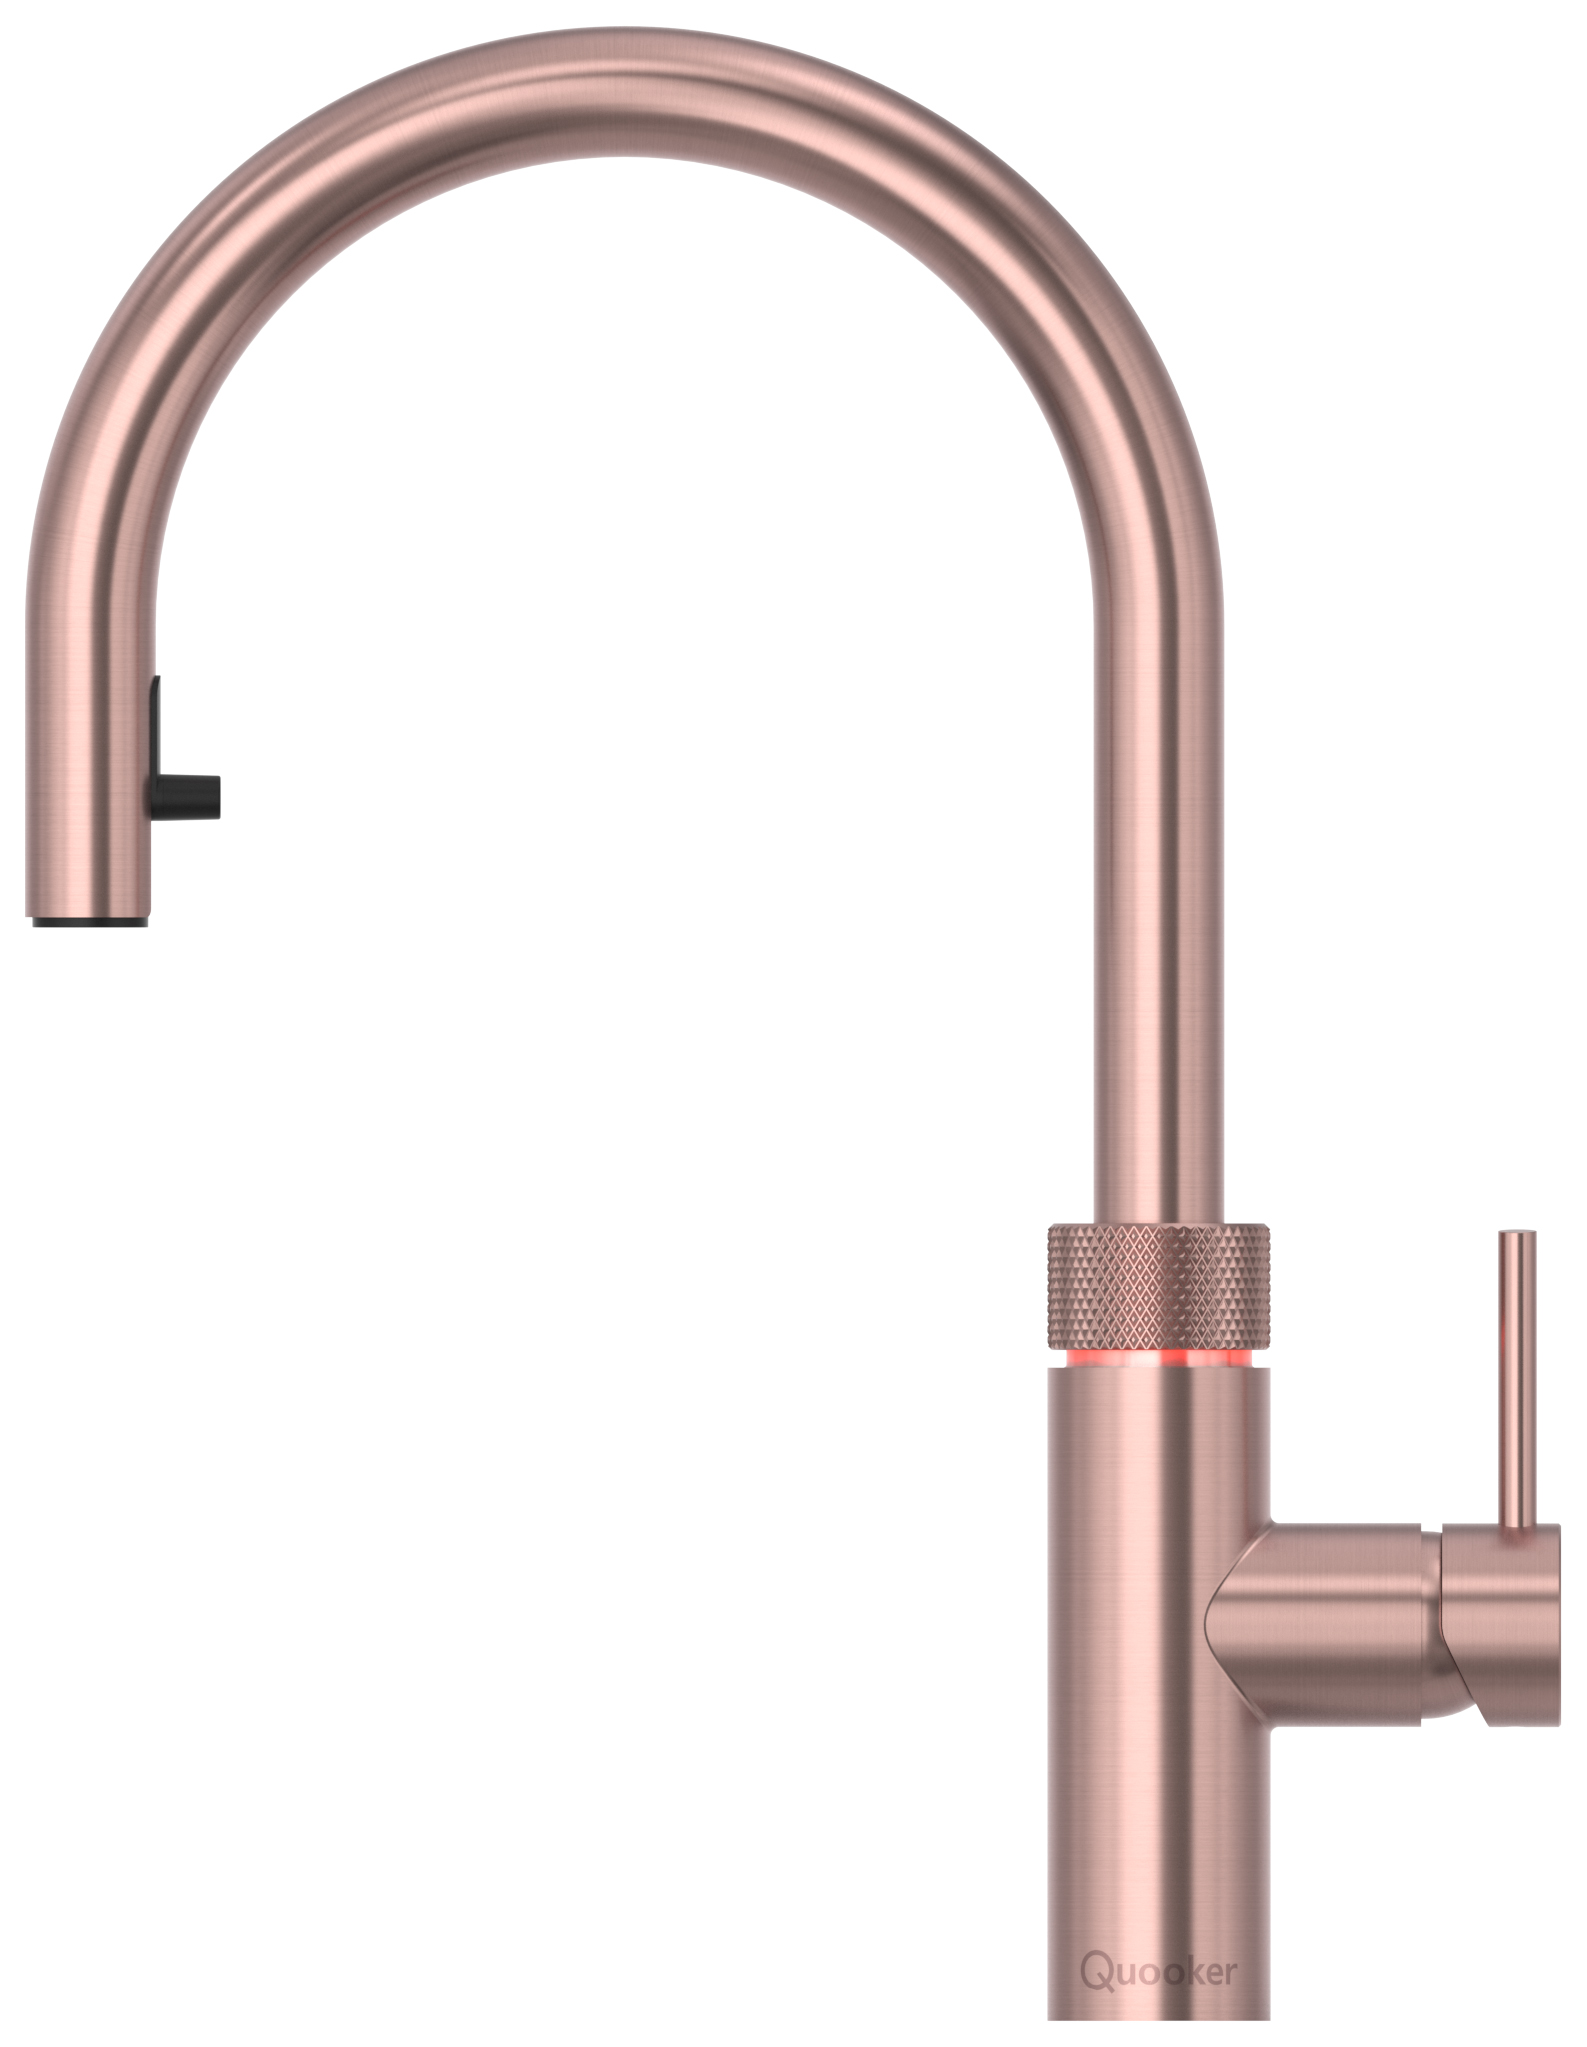 Quooker PRO3 Flex 3-in-1 Pull Out Boiling Water Kitchen Tap - Rose Copper